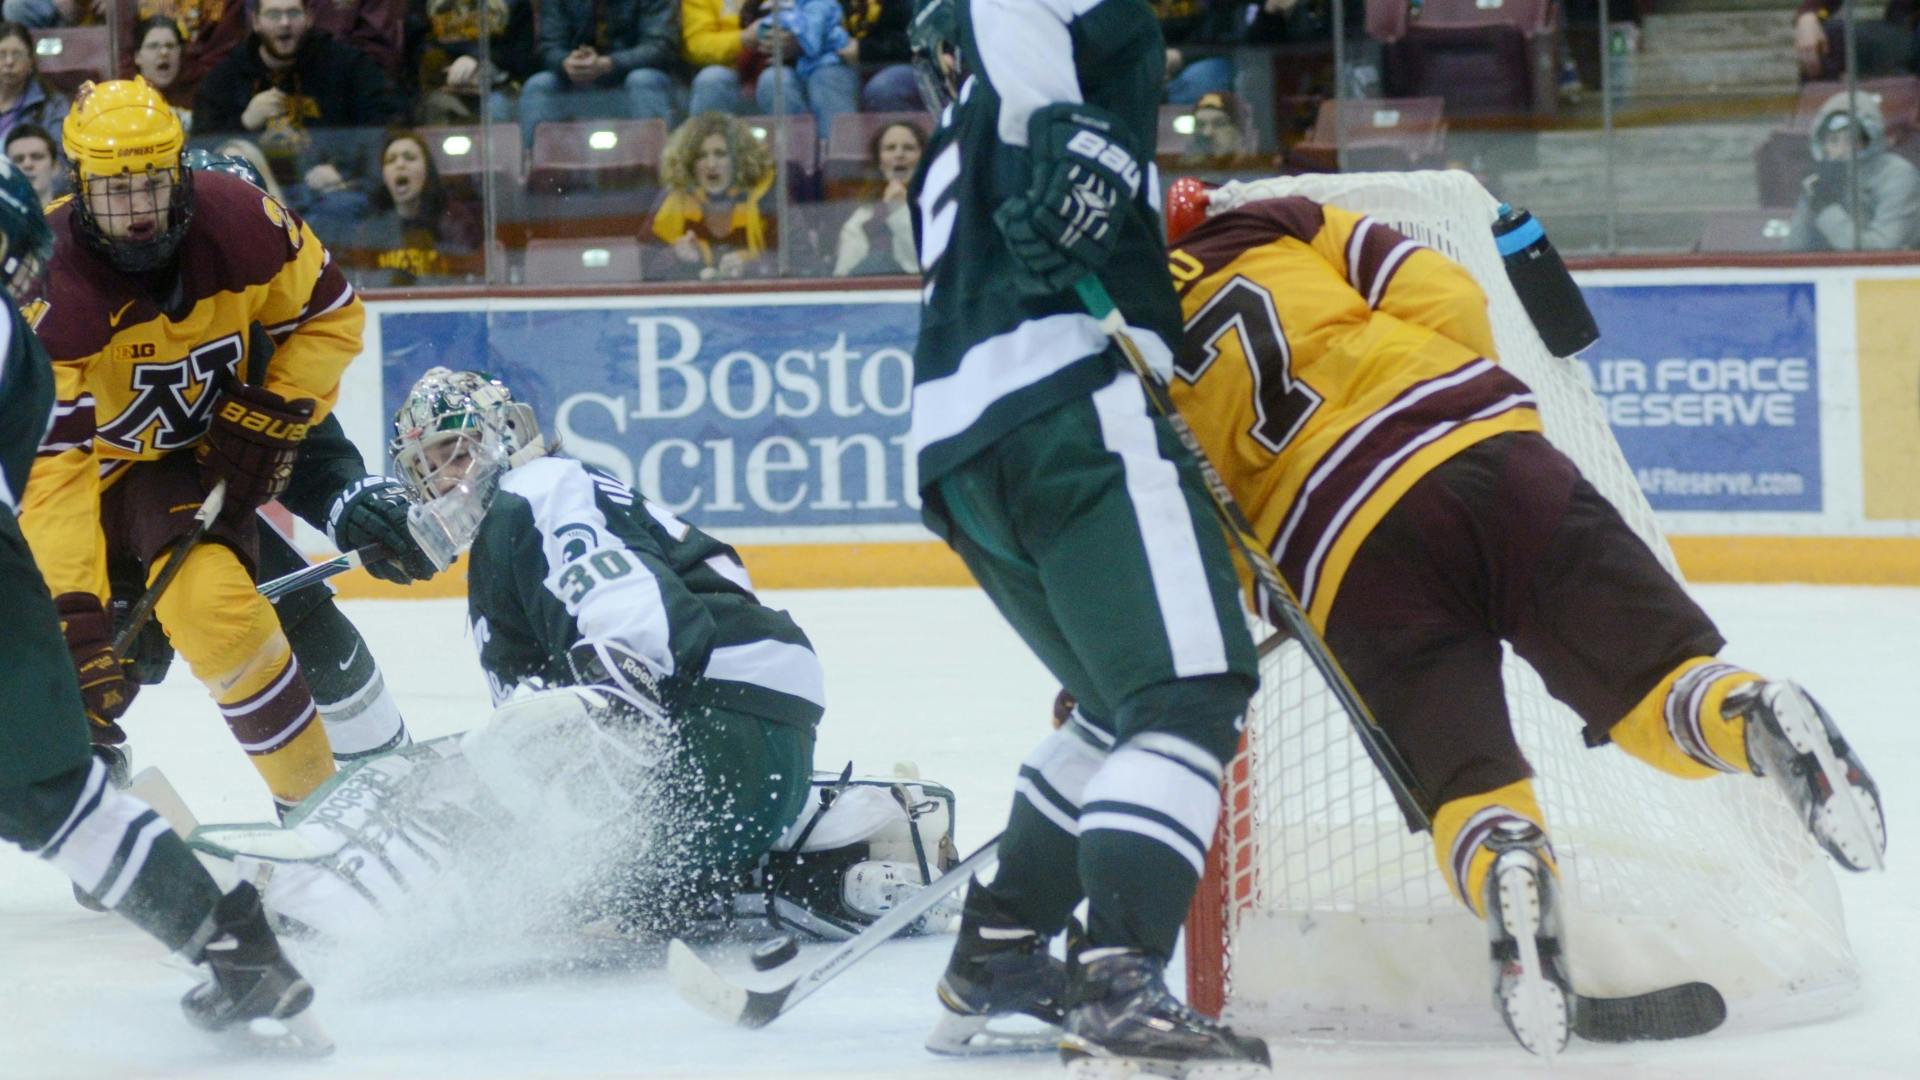 Senior Kyle Rau scored two goals, but the Gophers struggled with consistency in a 4-2 loss to Michigan State on Friday night.